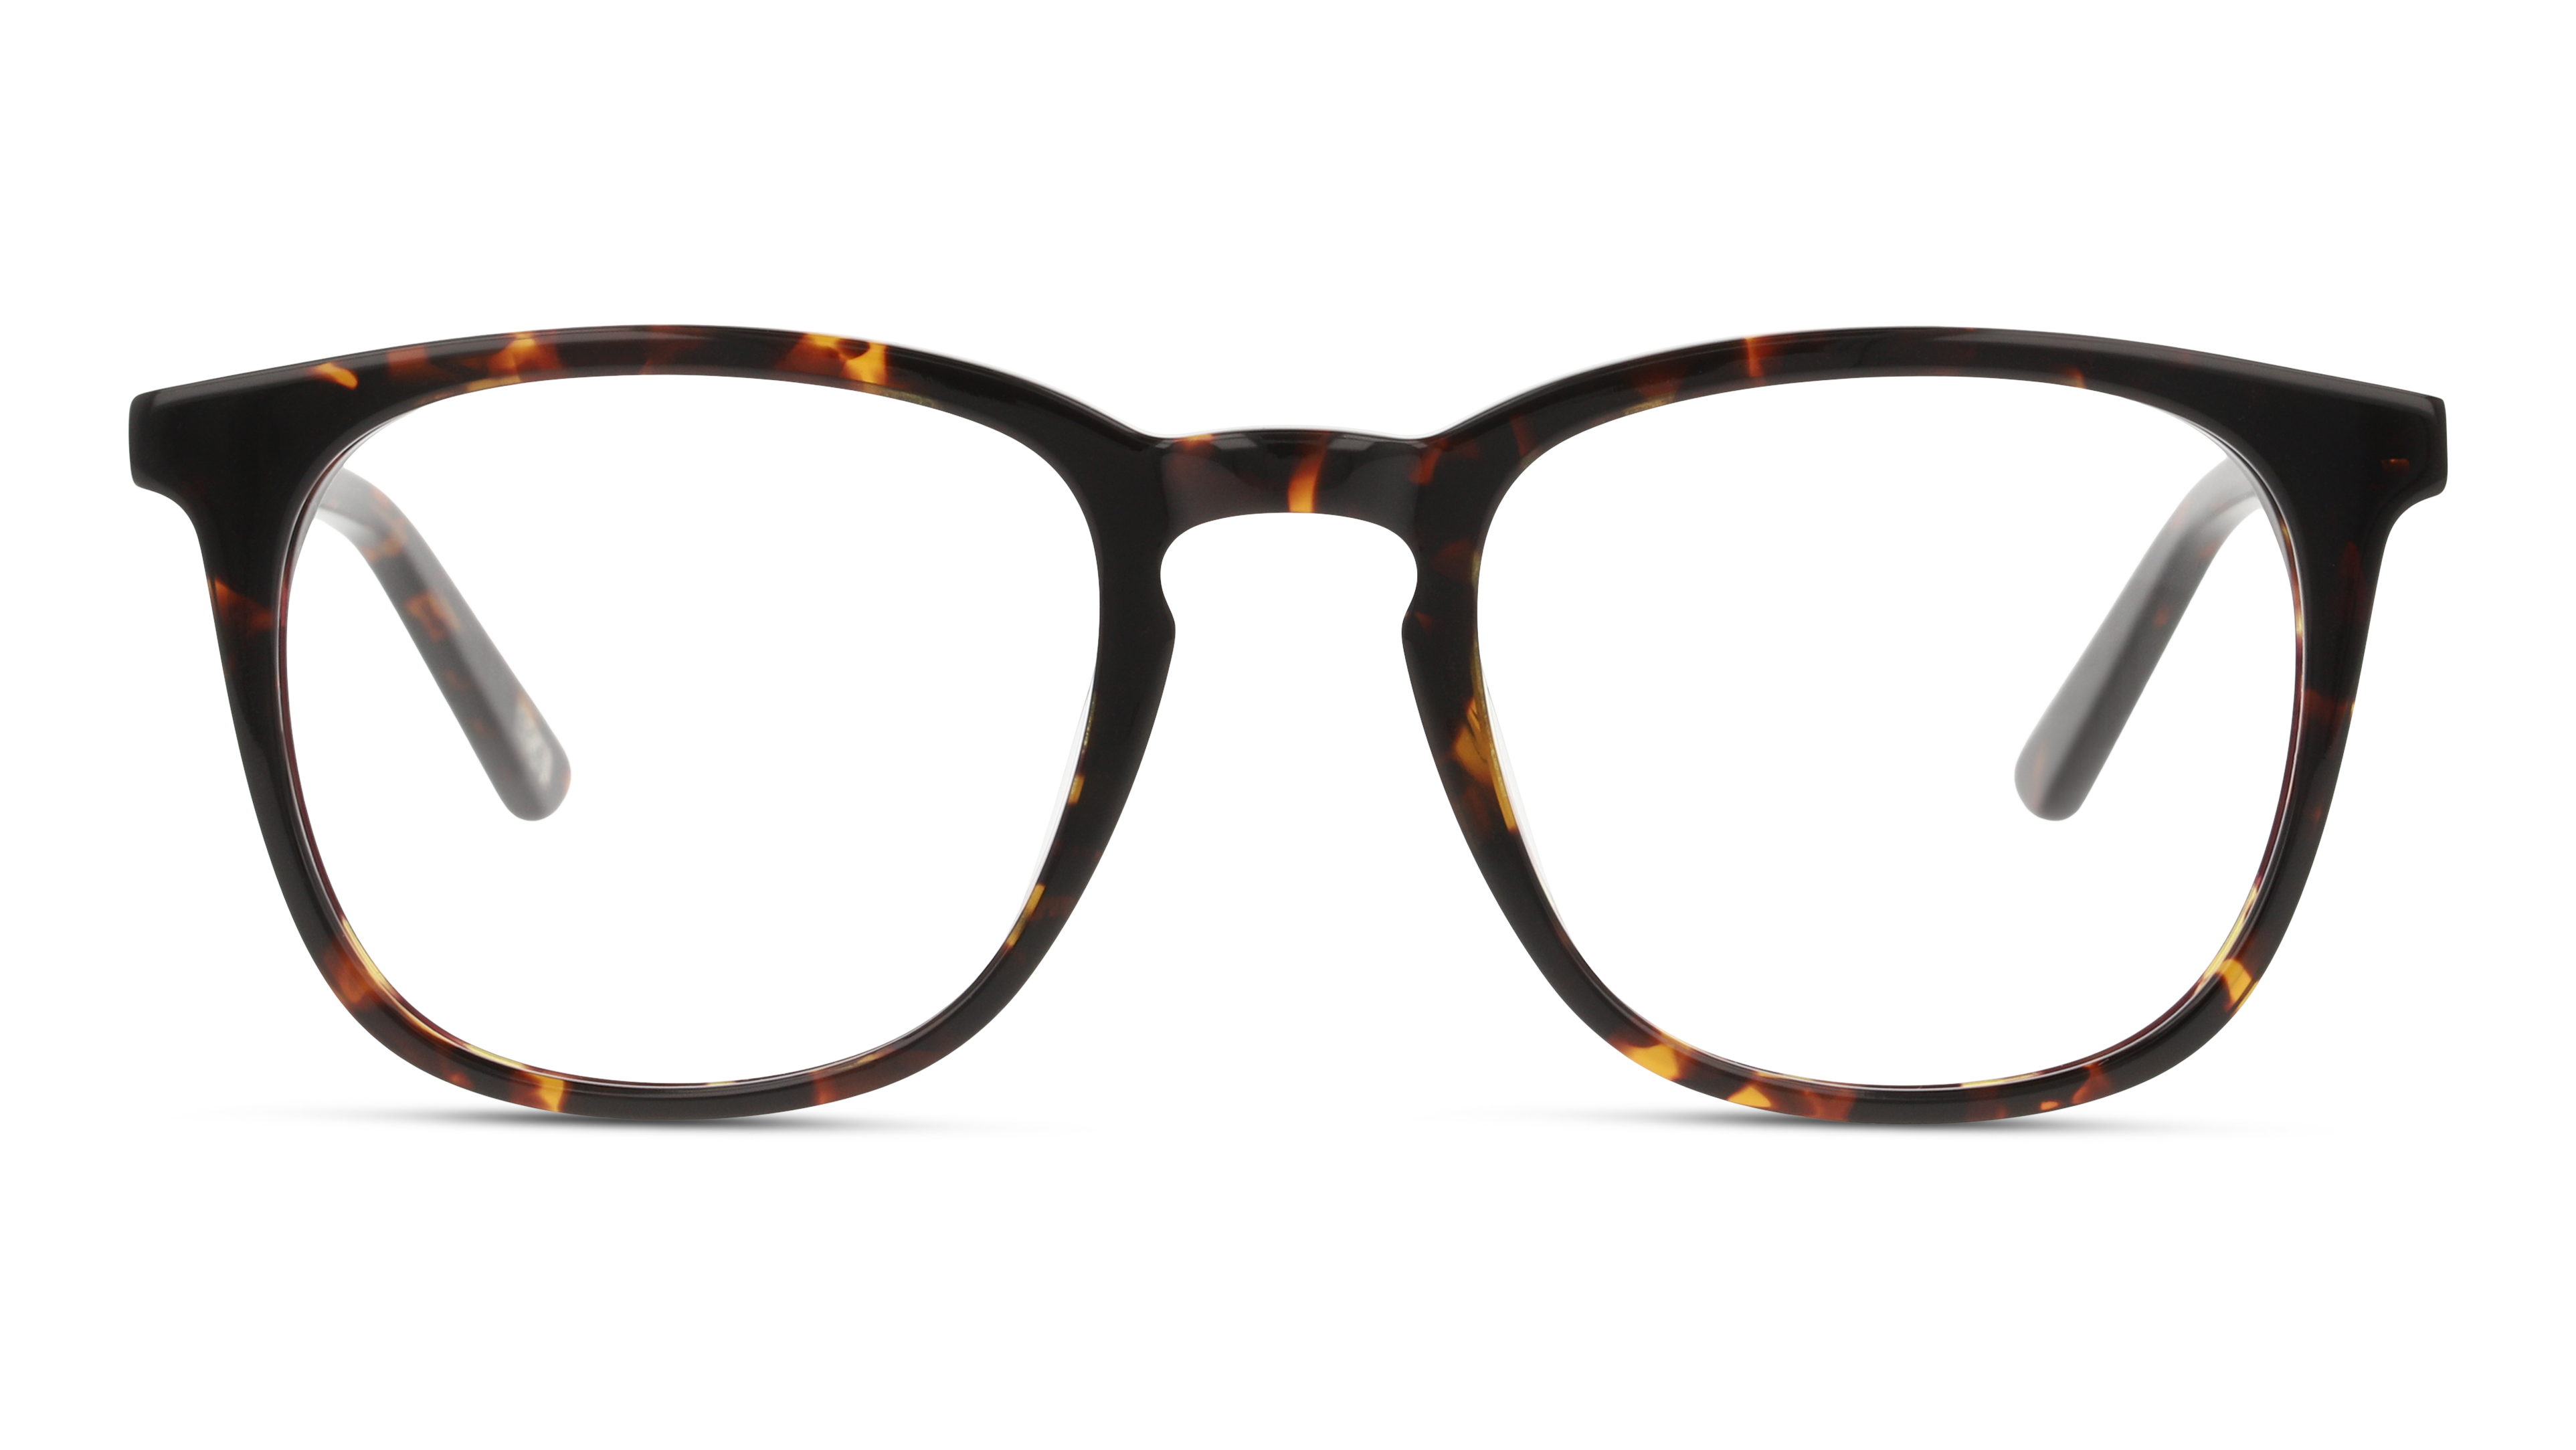 Front DBYD DBOM0035 (HH00) Glasses Transparent / Tortoise Shell